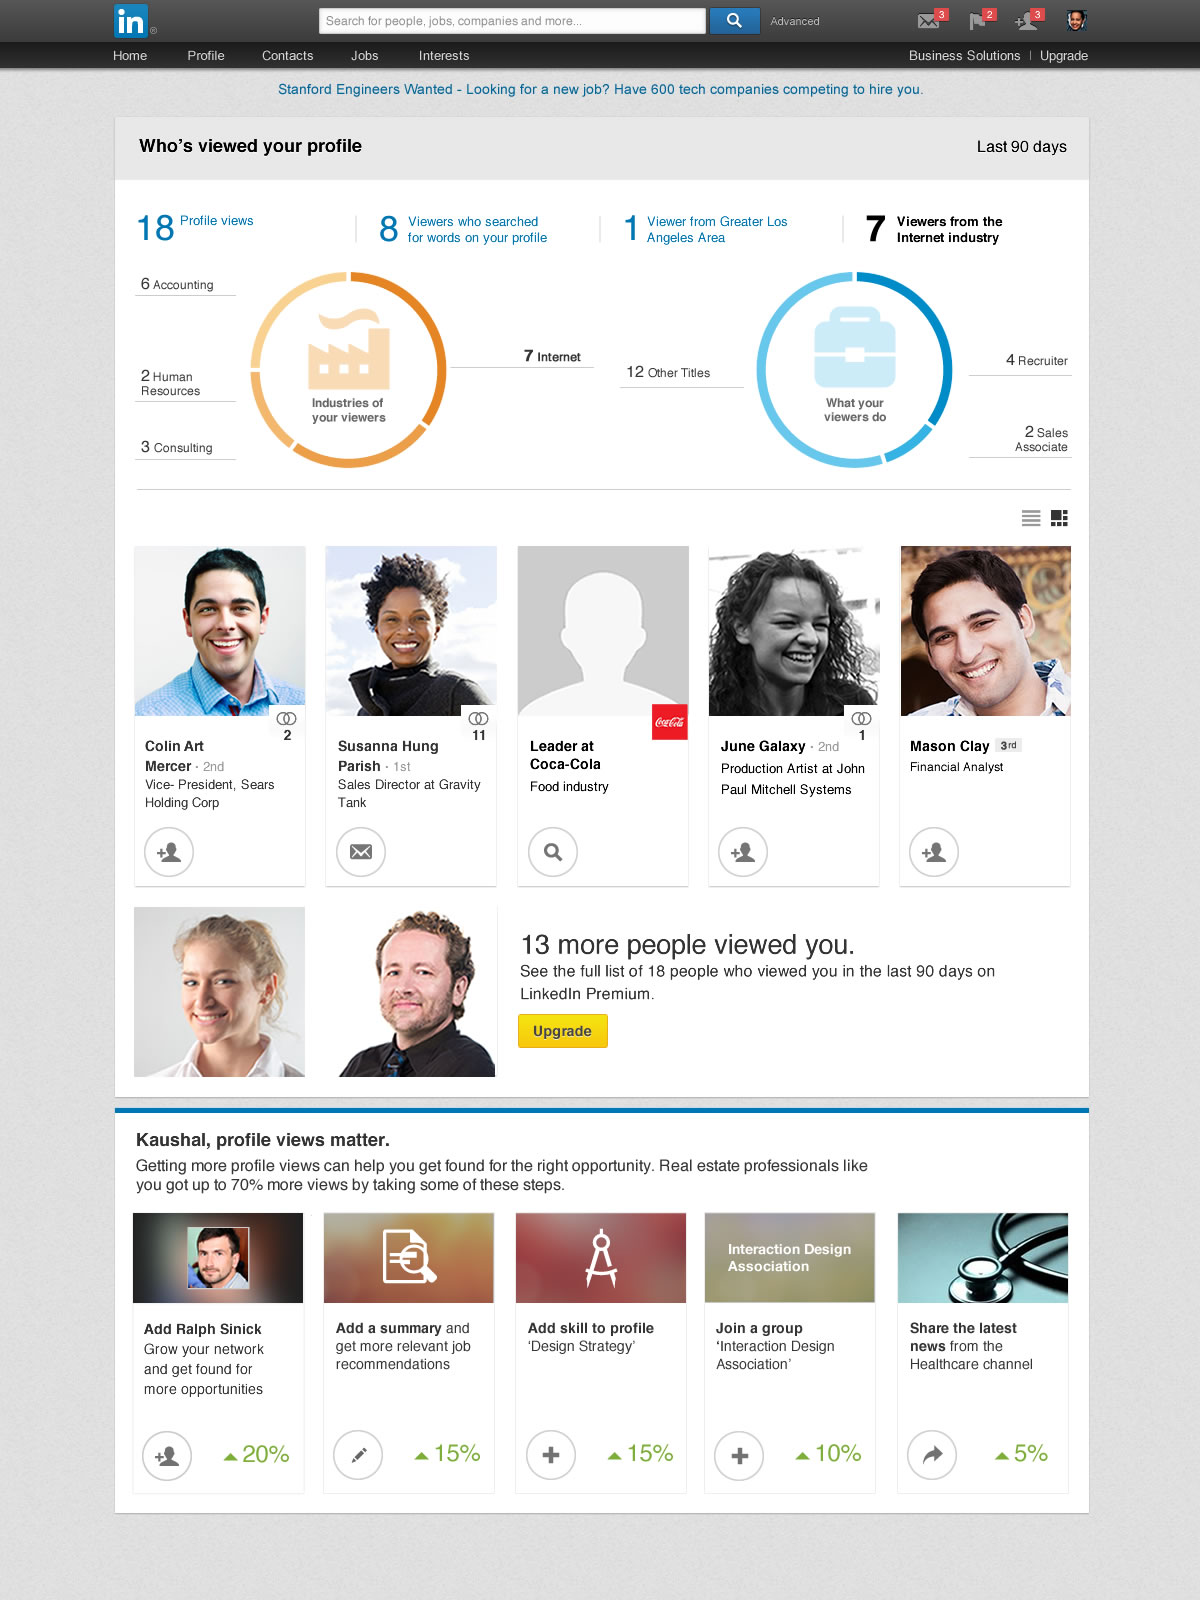 New Who's Viewed Your Profile Page photo credit: LinkedIn